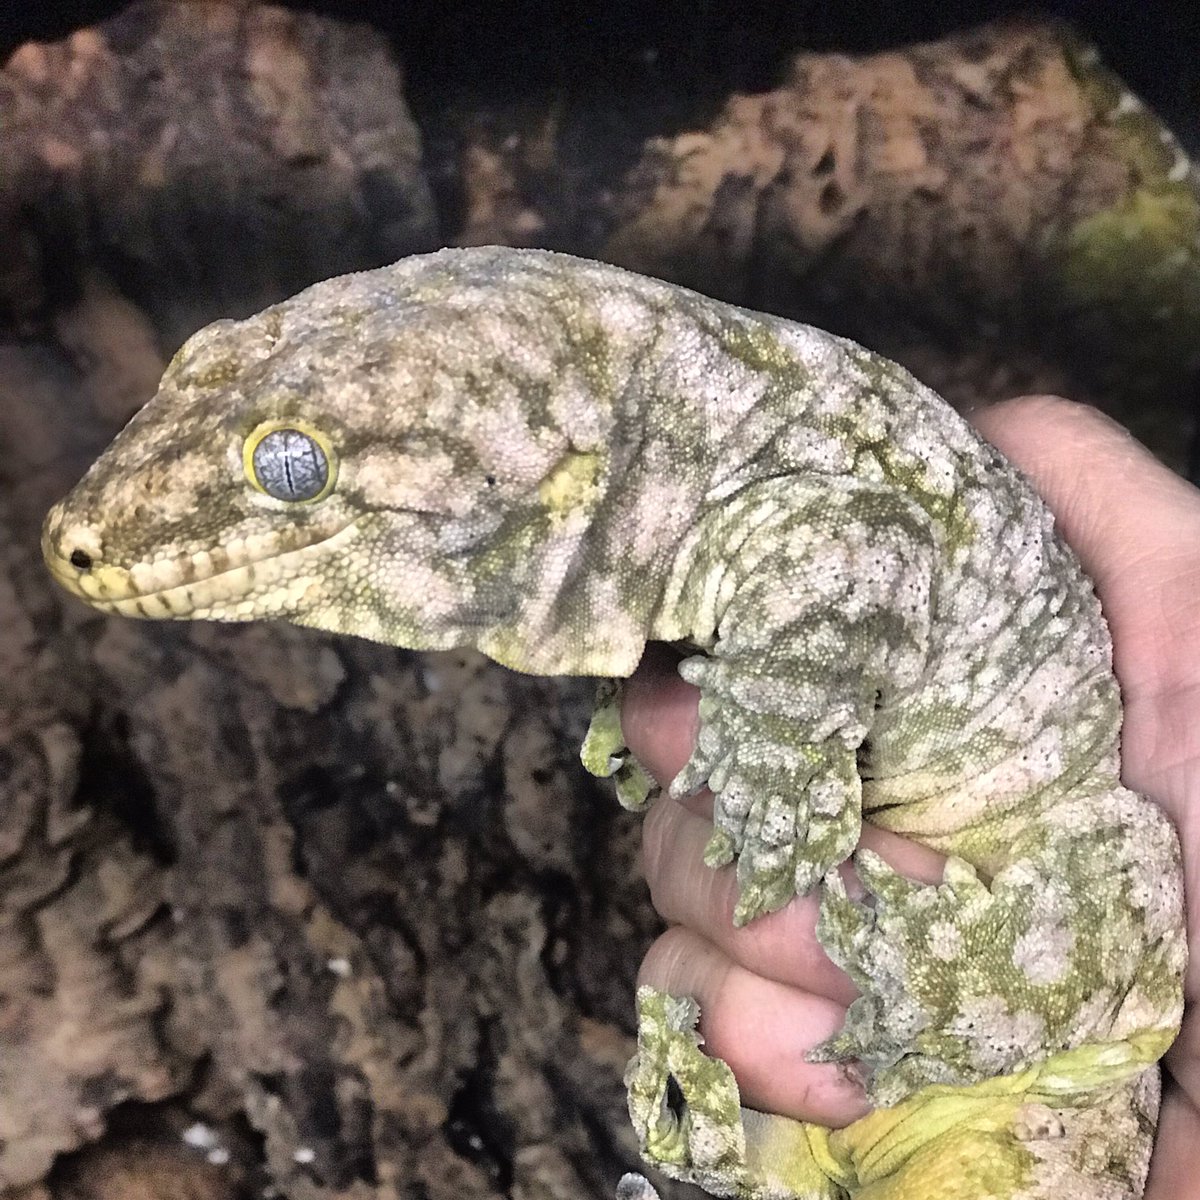 Let me say it for you .... “WOW” #GiantGecko #Leachie #wow